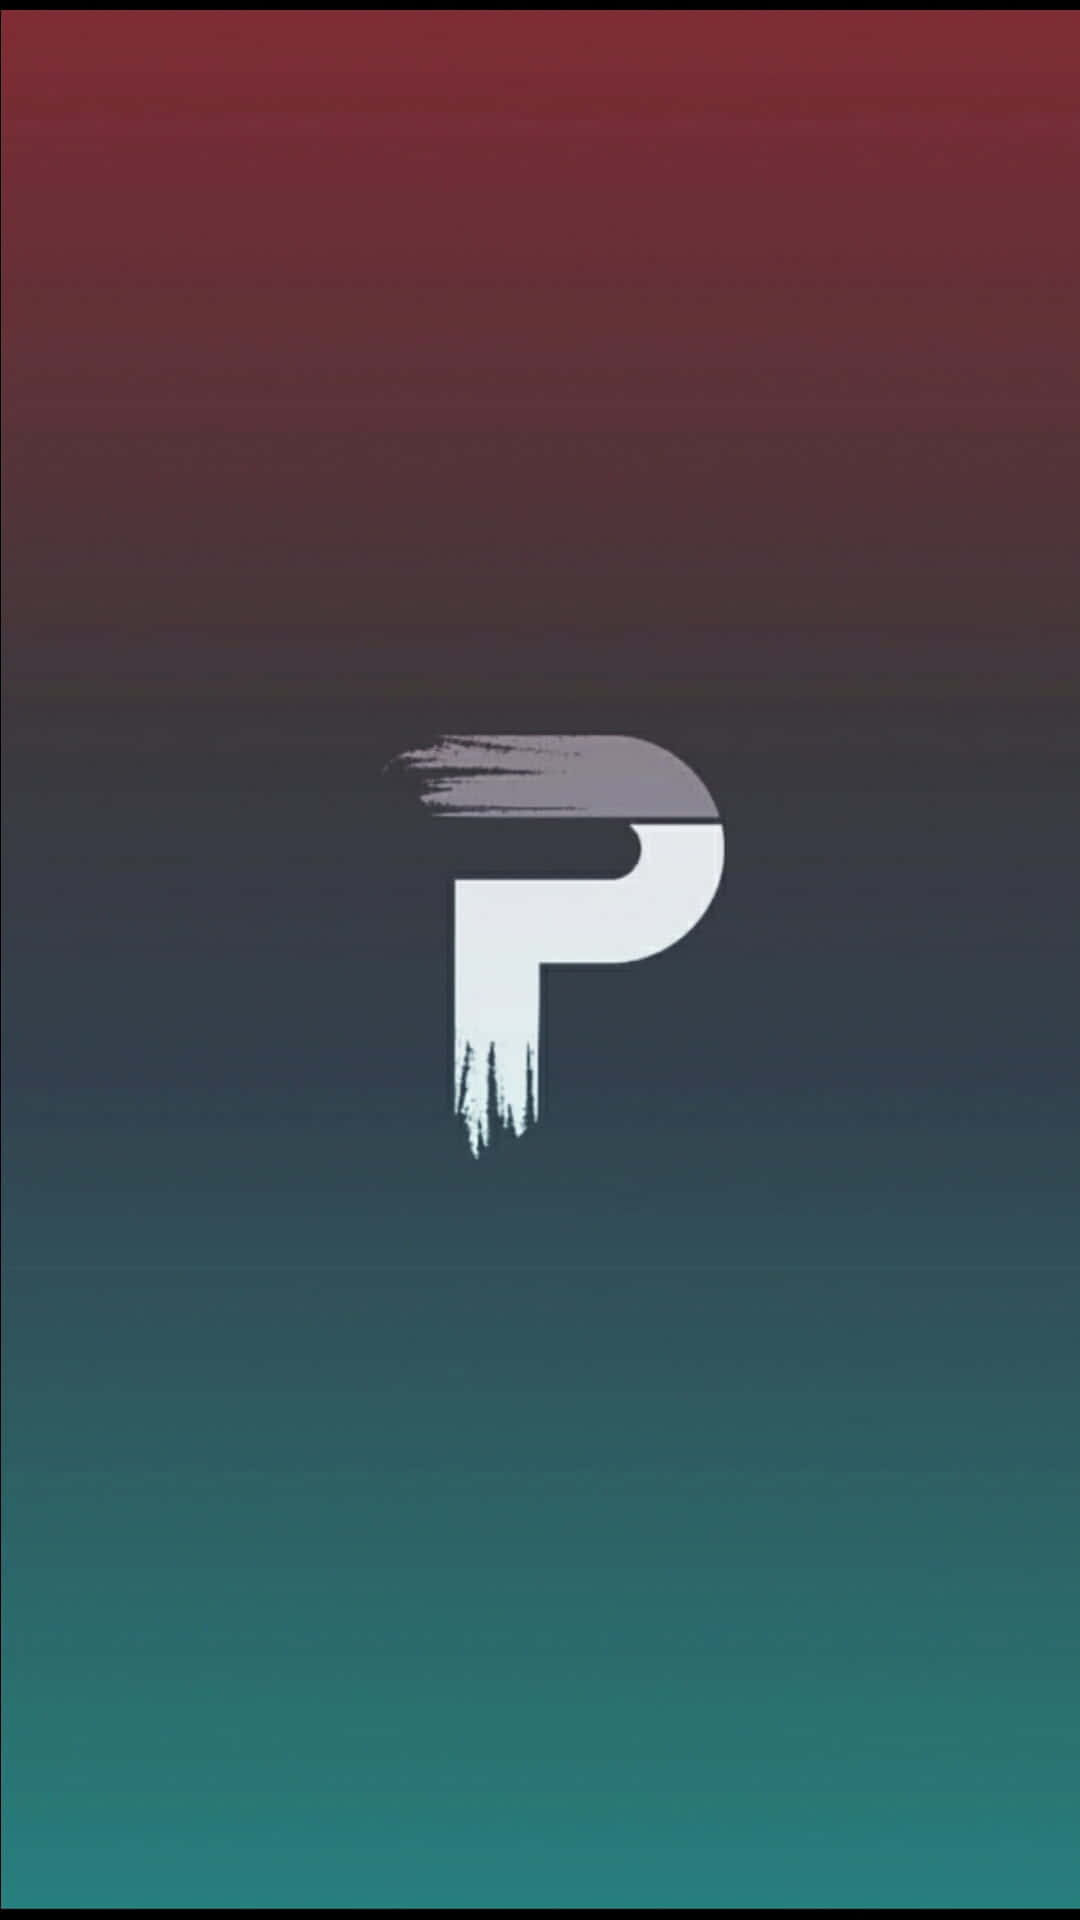 A Logo With The Letter P On It